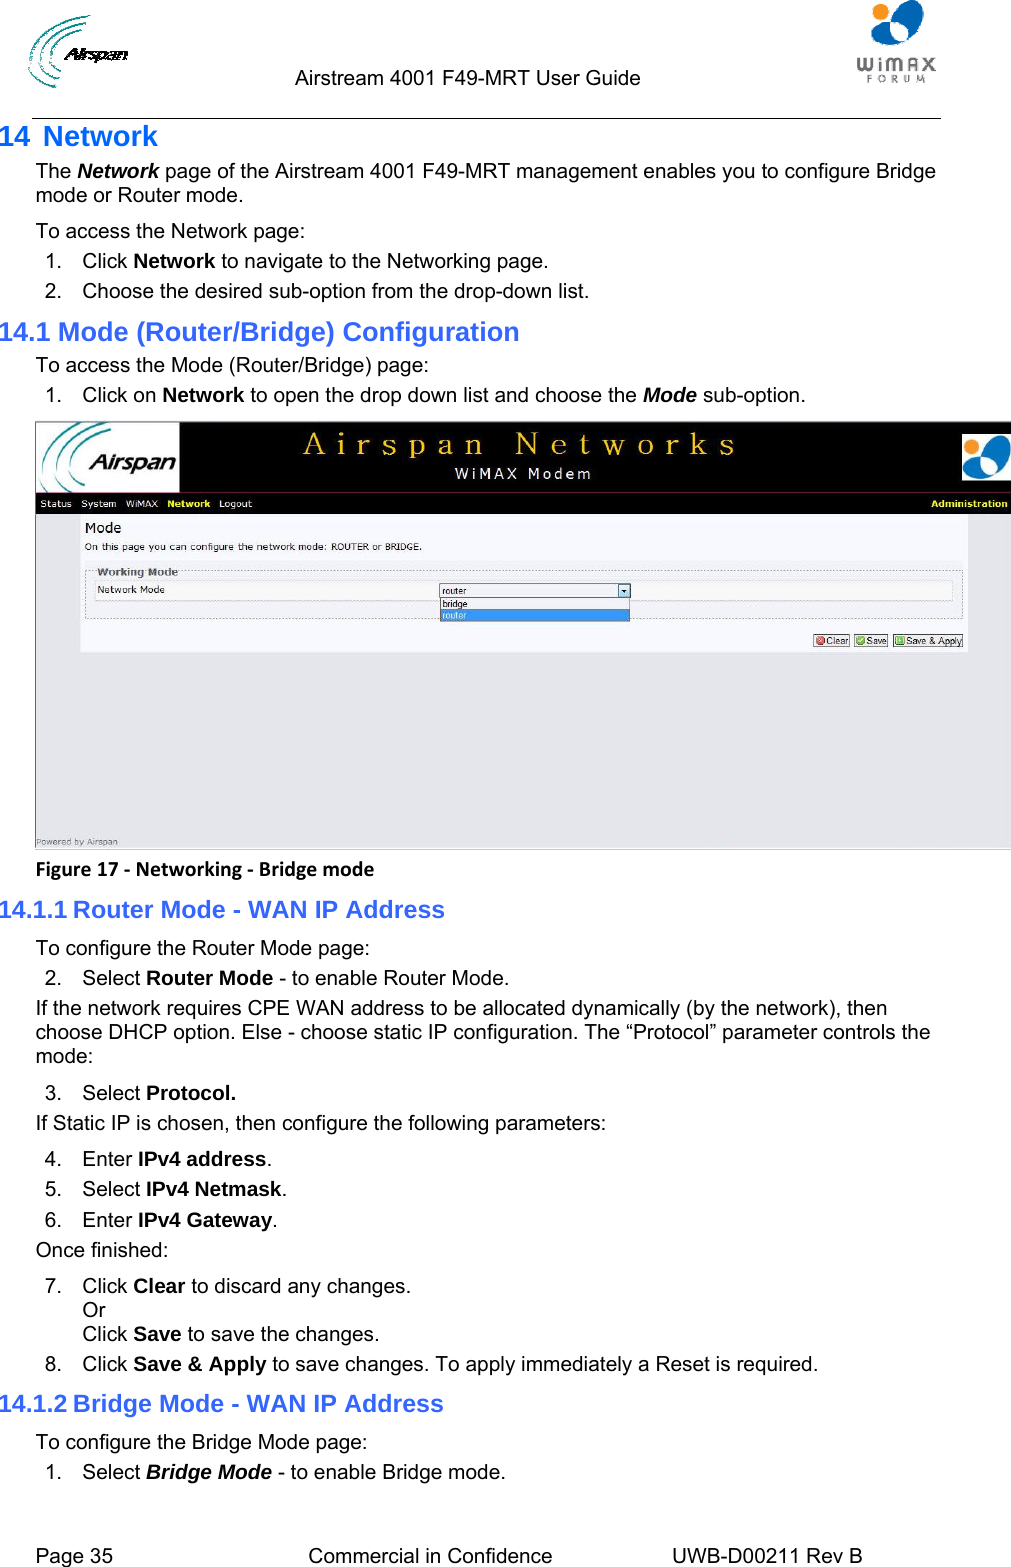                                  Airstream 4001 F49-MRT User Guide  Page 35  Commercial in Confidence  UWB-D00211 Rev B   14 Network The Network page of the Airstream 4001 F49-MRT management enables you to configure Bridge mode or Router mode. To access the Network page: 1. Click Network to navigate to the Networking page. 2.  Choose the desired sub-option from the drop-down list. 14.1 Mode (Router/Bridge) Configuration To access the Mode (Router/Bridge) page: 1. Click on Network to open the drop down list and choose the Mode sub-option.  Figure17‐Networking‐Bridgemode14.1.1 Router Mode - WAN IP Address To configure the Router Mode page: 2. Select Router Mode - to enable Router Mode. If the network requires CPE WAN address to be allocated dynamically (by the network), then choose DHCP option. Else - choose static IP configuration. The “Protocol” parameter controls the mode: 3. Select Protocol.  If Static IP is chosen, then configure the following parameters: 4. Enter IPv4 address. 5. Select IPv4 Netmask. 6. Enter IPv4 Gateway. Once finished: 7. Click Clear to discard any changes. Or  Click Save to save the changes. 8. Click Save &amp; Apply to save changes. To apply immediately a Reset is required. 14.1.2 Bridge Mode - WAN IP Address To configure the Bridge Mode page: 1. Select Bridge Mode - to enable Bridge mode. 